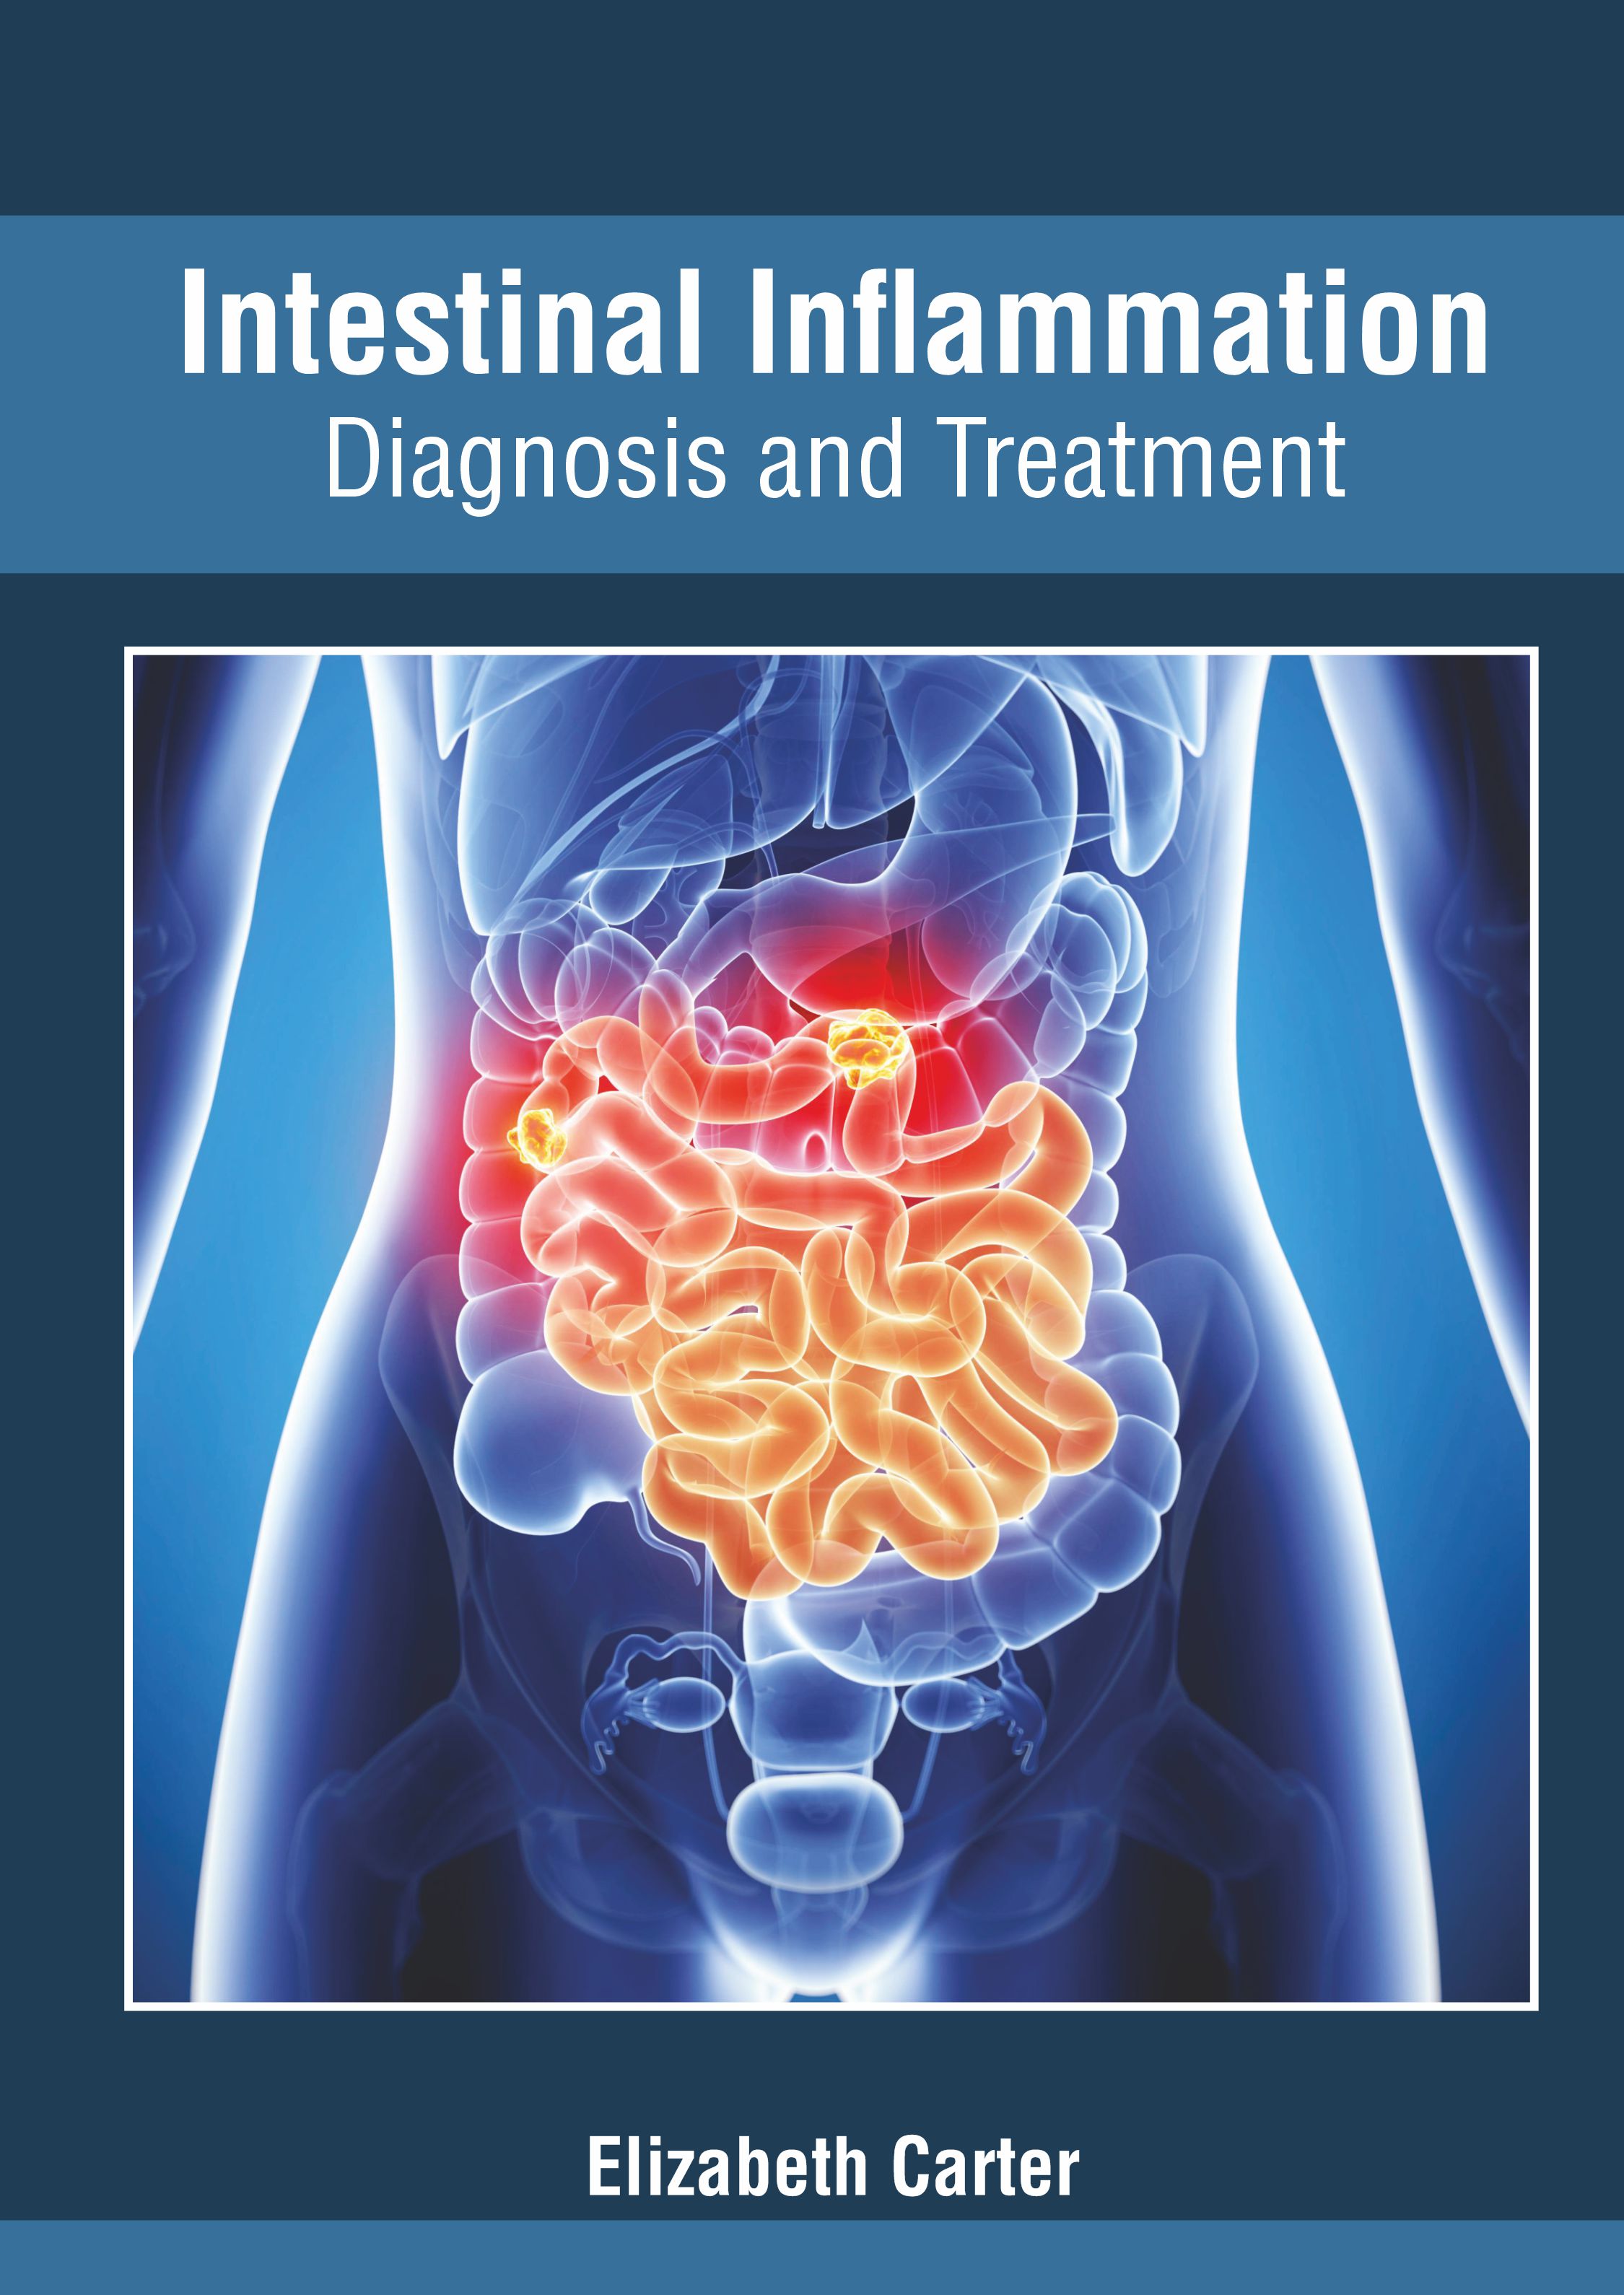 
exclusive-publishers/american-medical-publishers/intestinal-inflammation-diagnosis-and-treatment-9781639271450